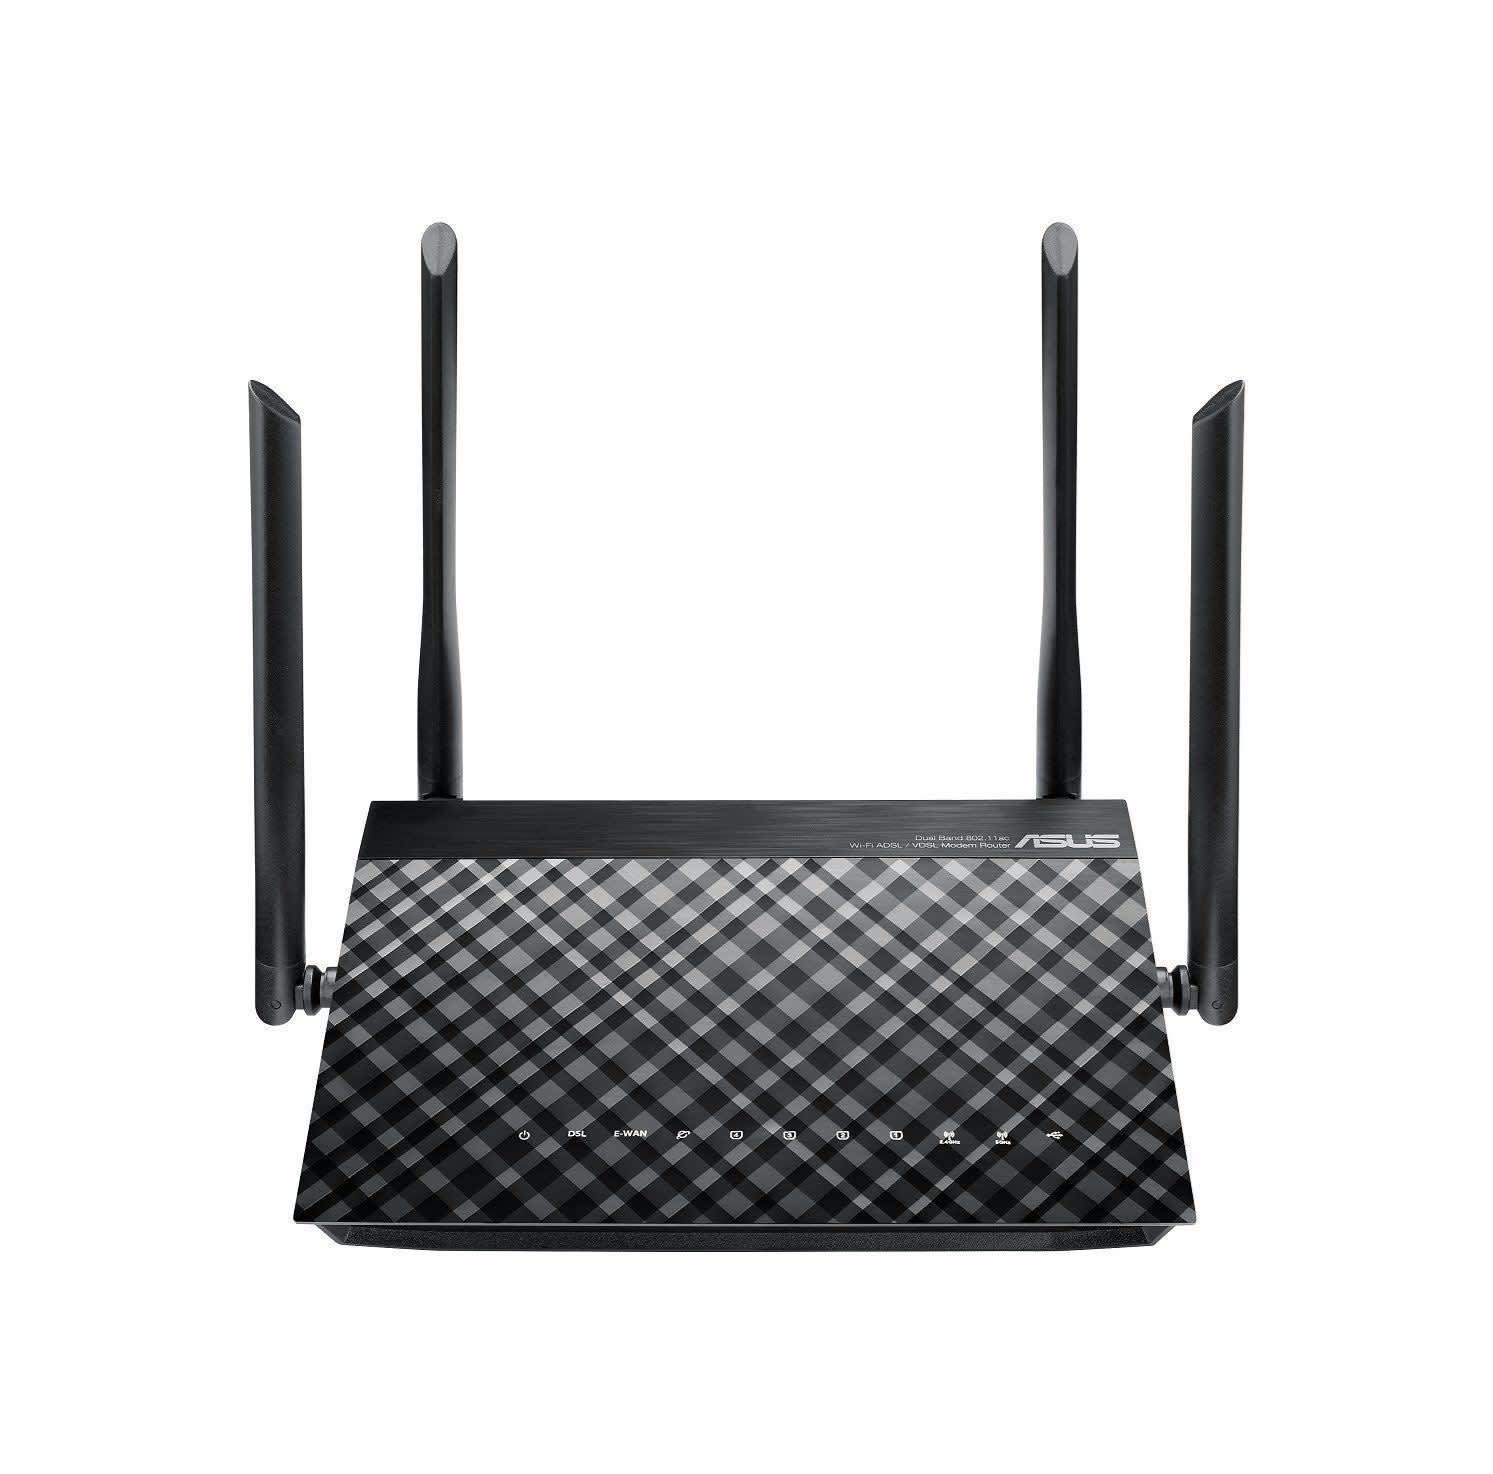 ASUS AC52U ADSL Modem Router (AC750) for sale with Makro Outlet and bidorbuy